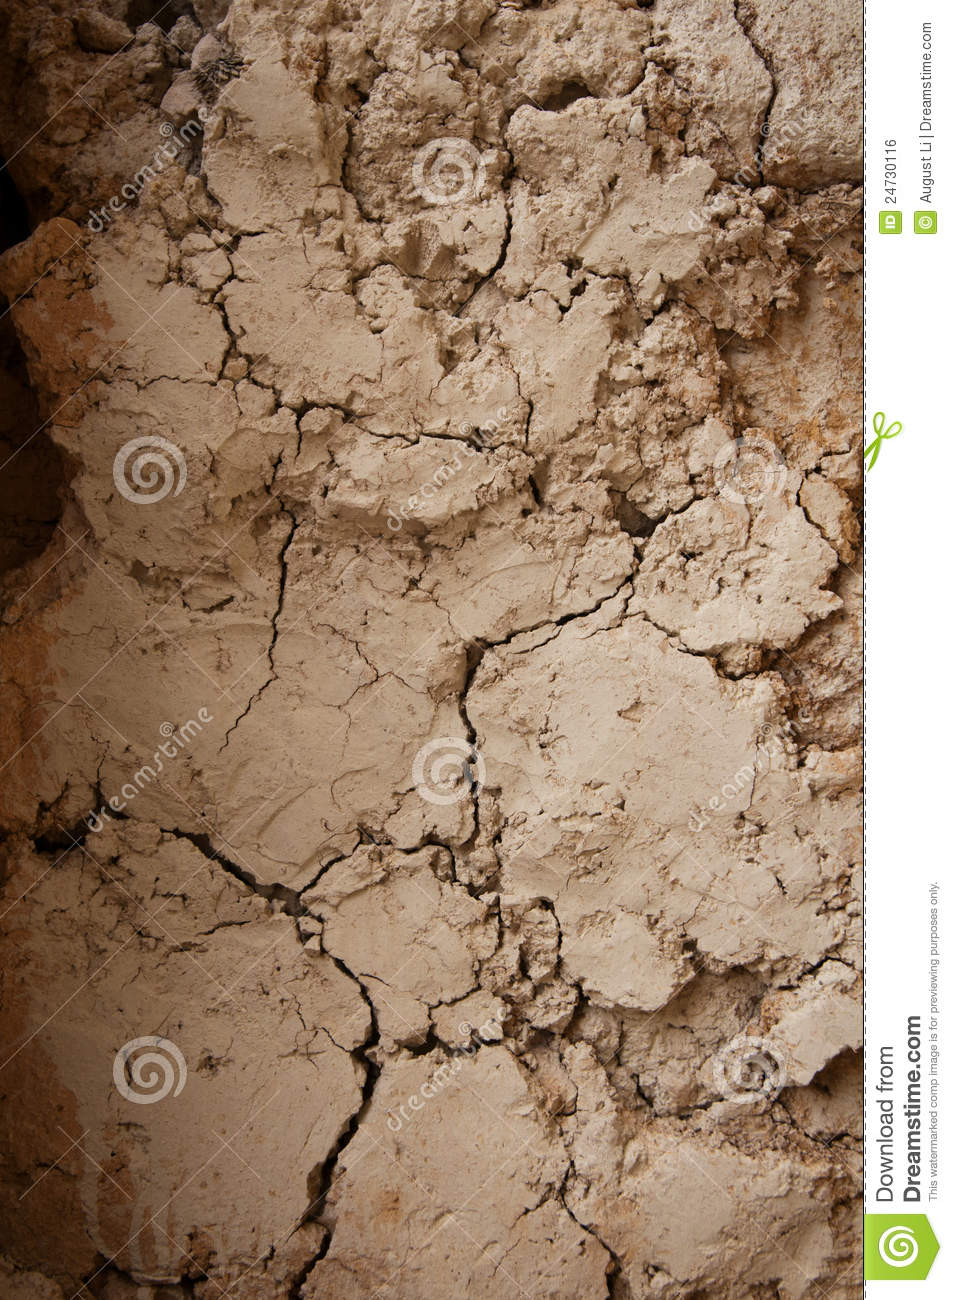 Mud Wall As Background Royalty Free Stock Image   Image  24730116